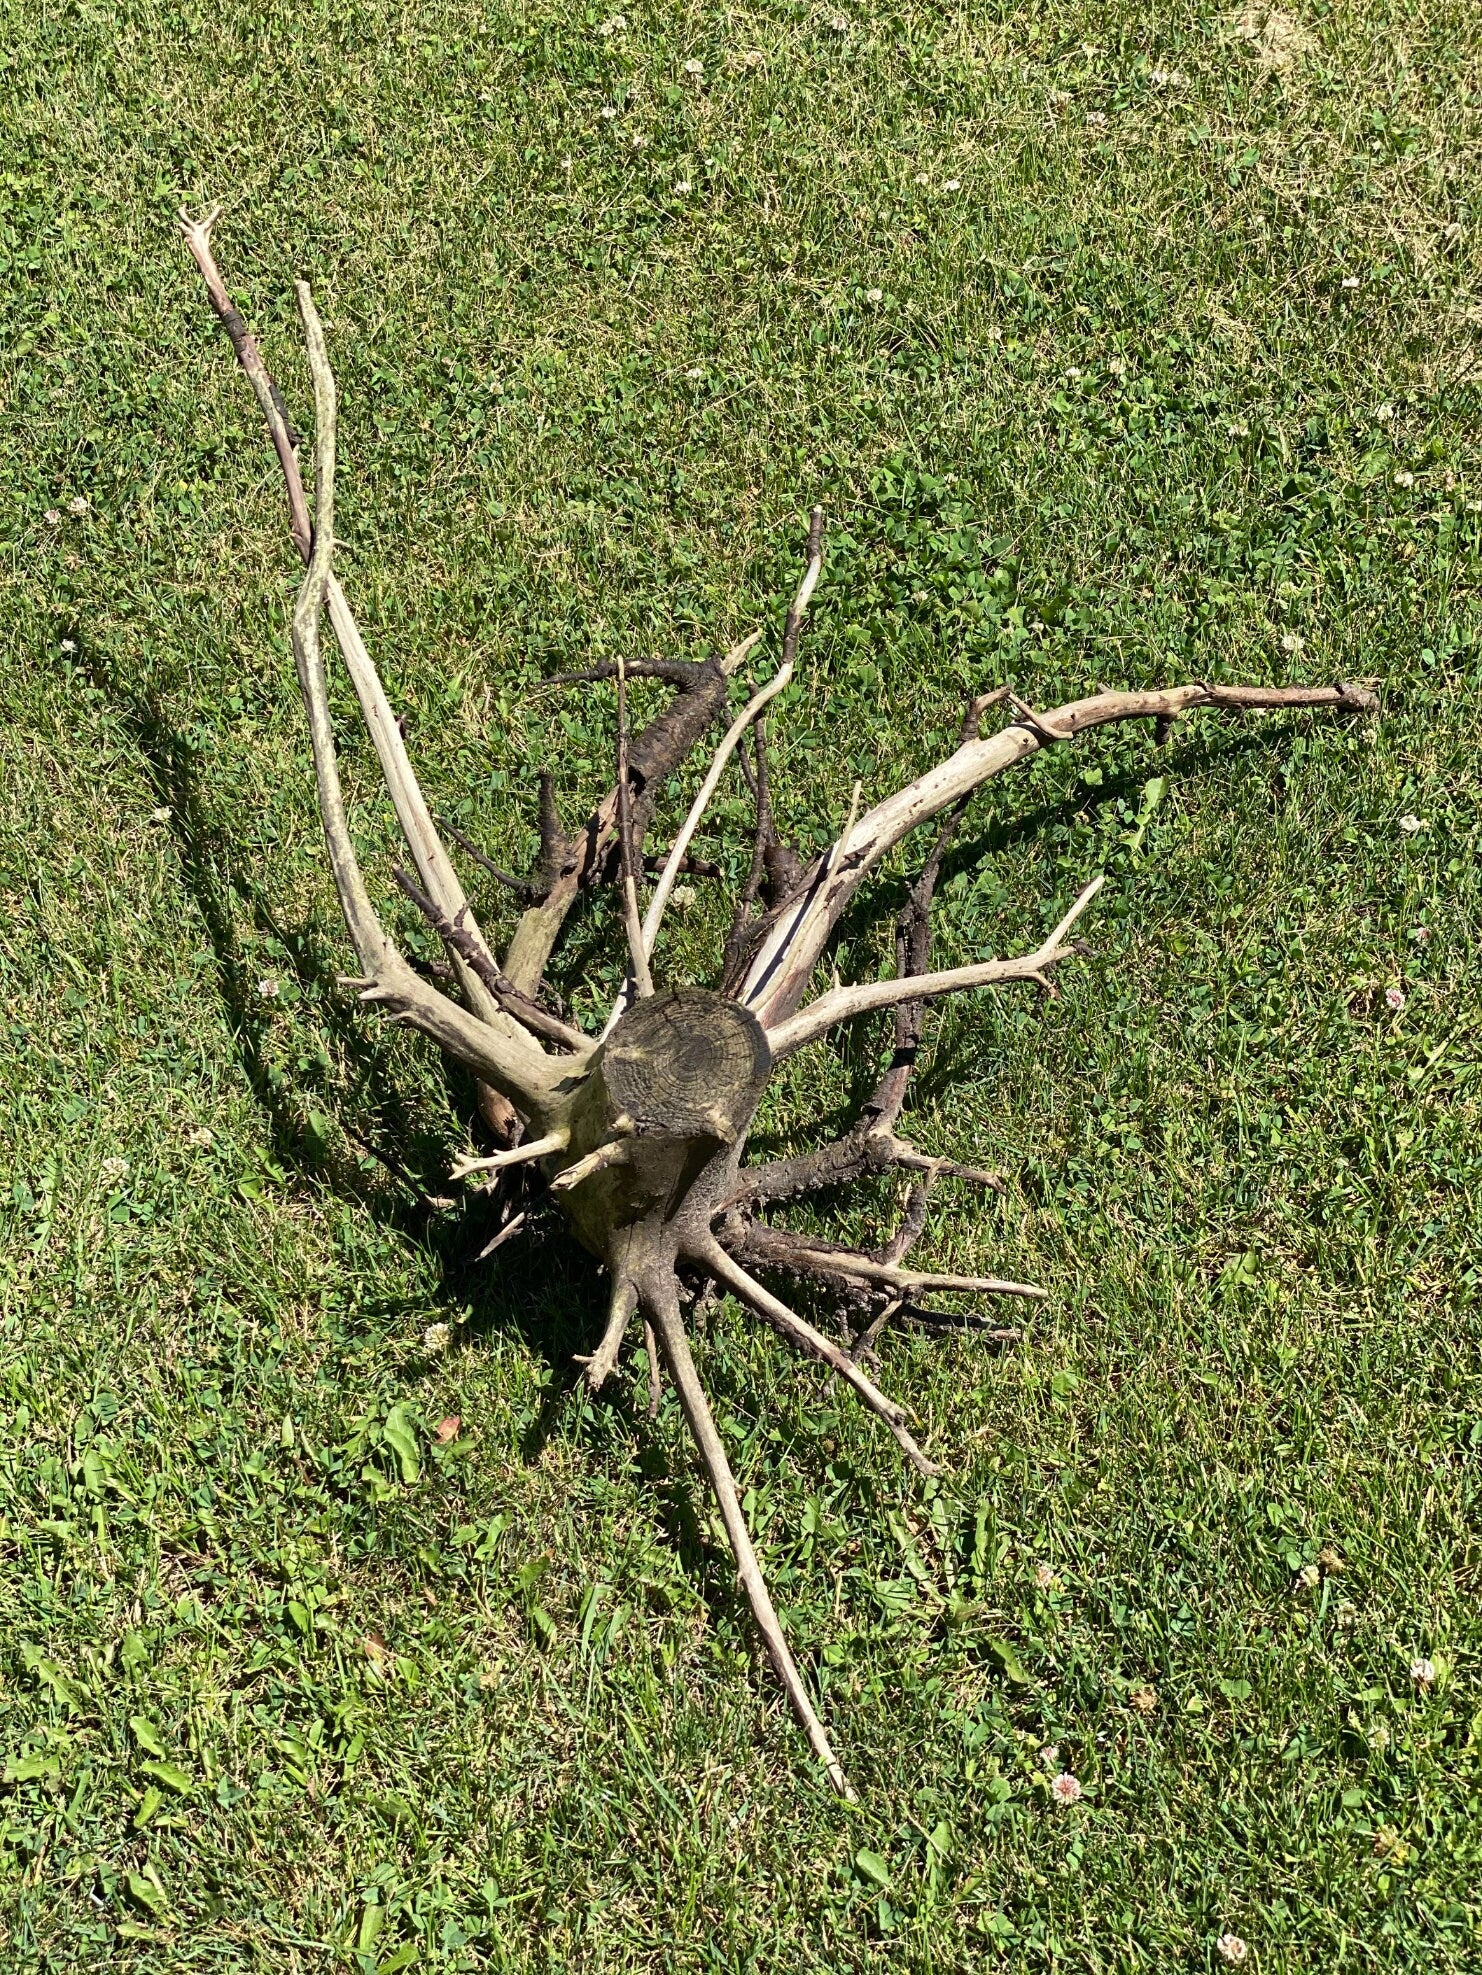 Spider Log, Approximately 29 Inches x 25 Inches x 9 Inches